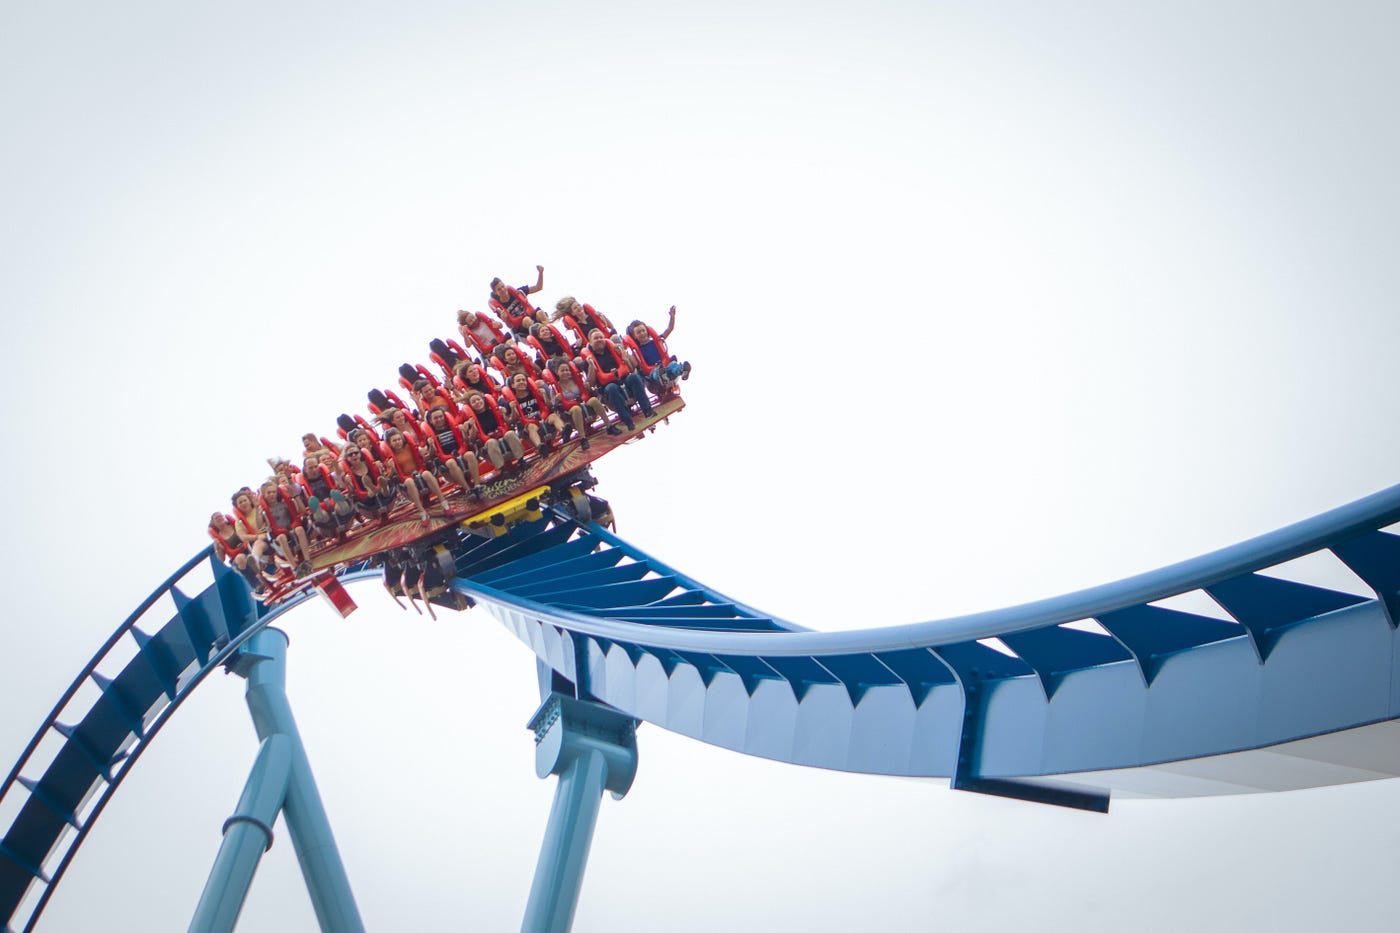 Thrills or Chills? Roller Coaster Safety a Mystery